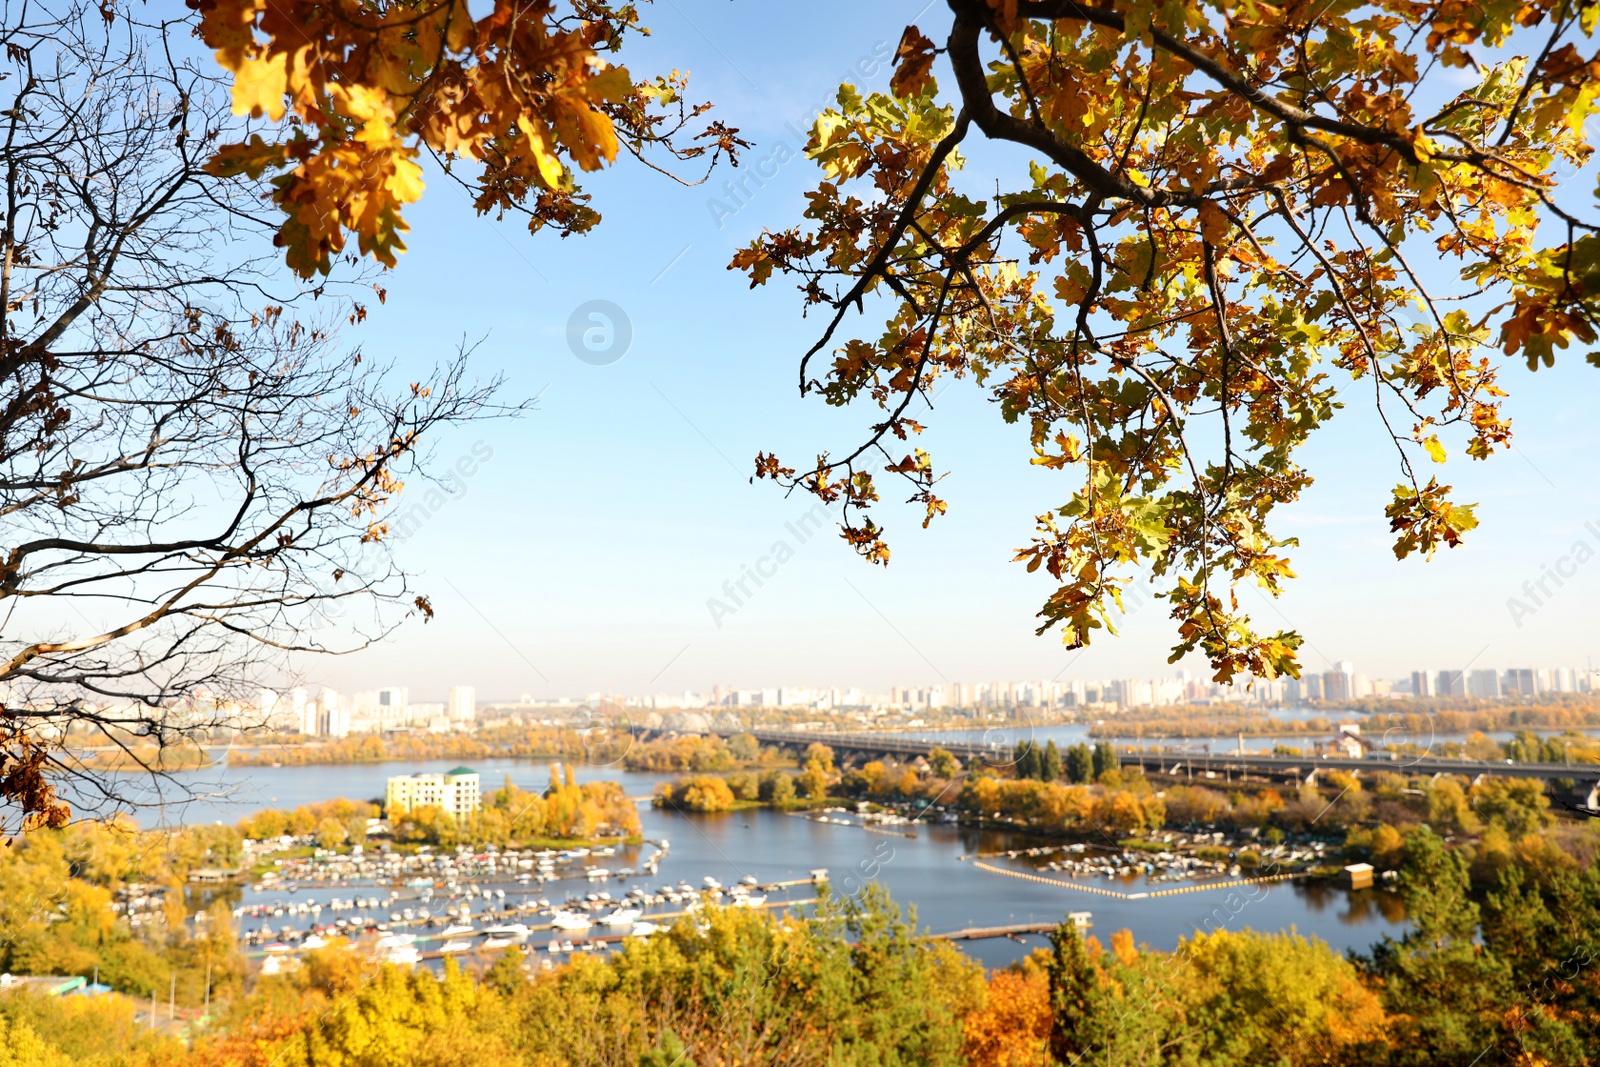 Photo of Picturesque view of river and trees with bright leaves. Autumn season